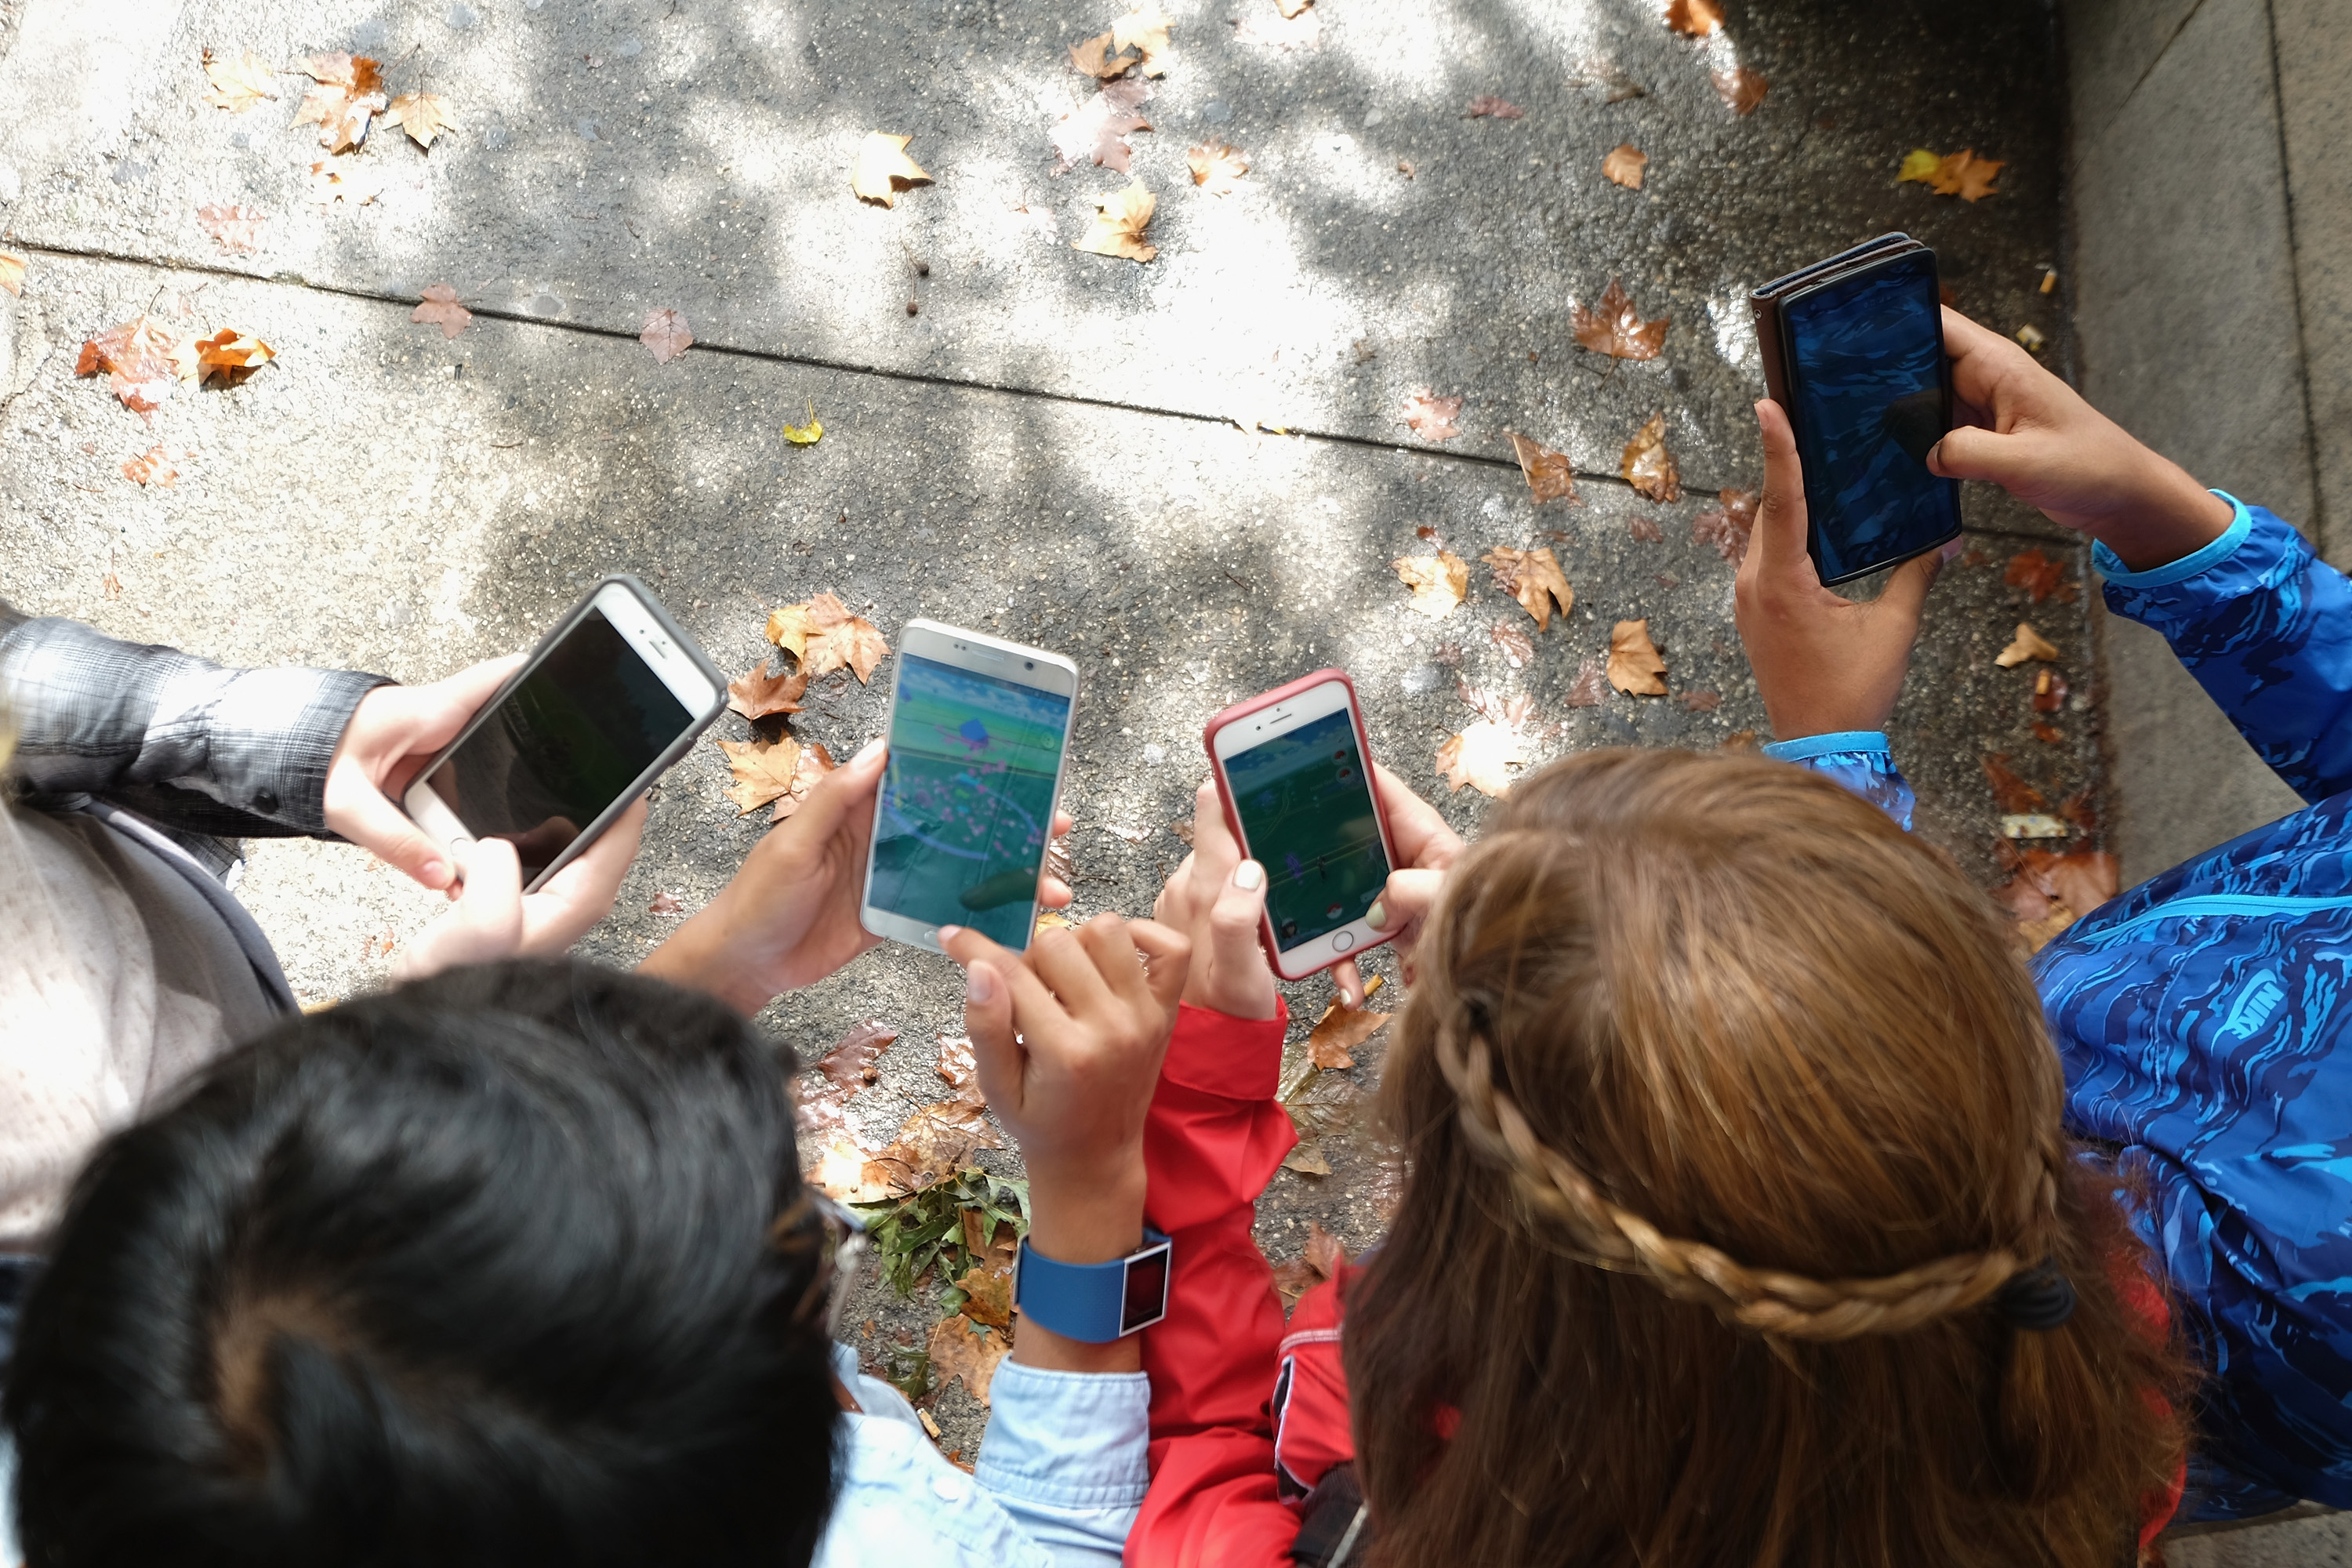 Children play Pokemon Go in Central Park as Pokemon Go craze hits New York City on July 29, 2016 in New York City. (Michael Loccisano&mdash;Getty Images)